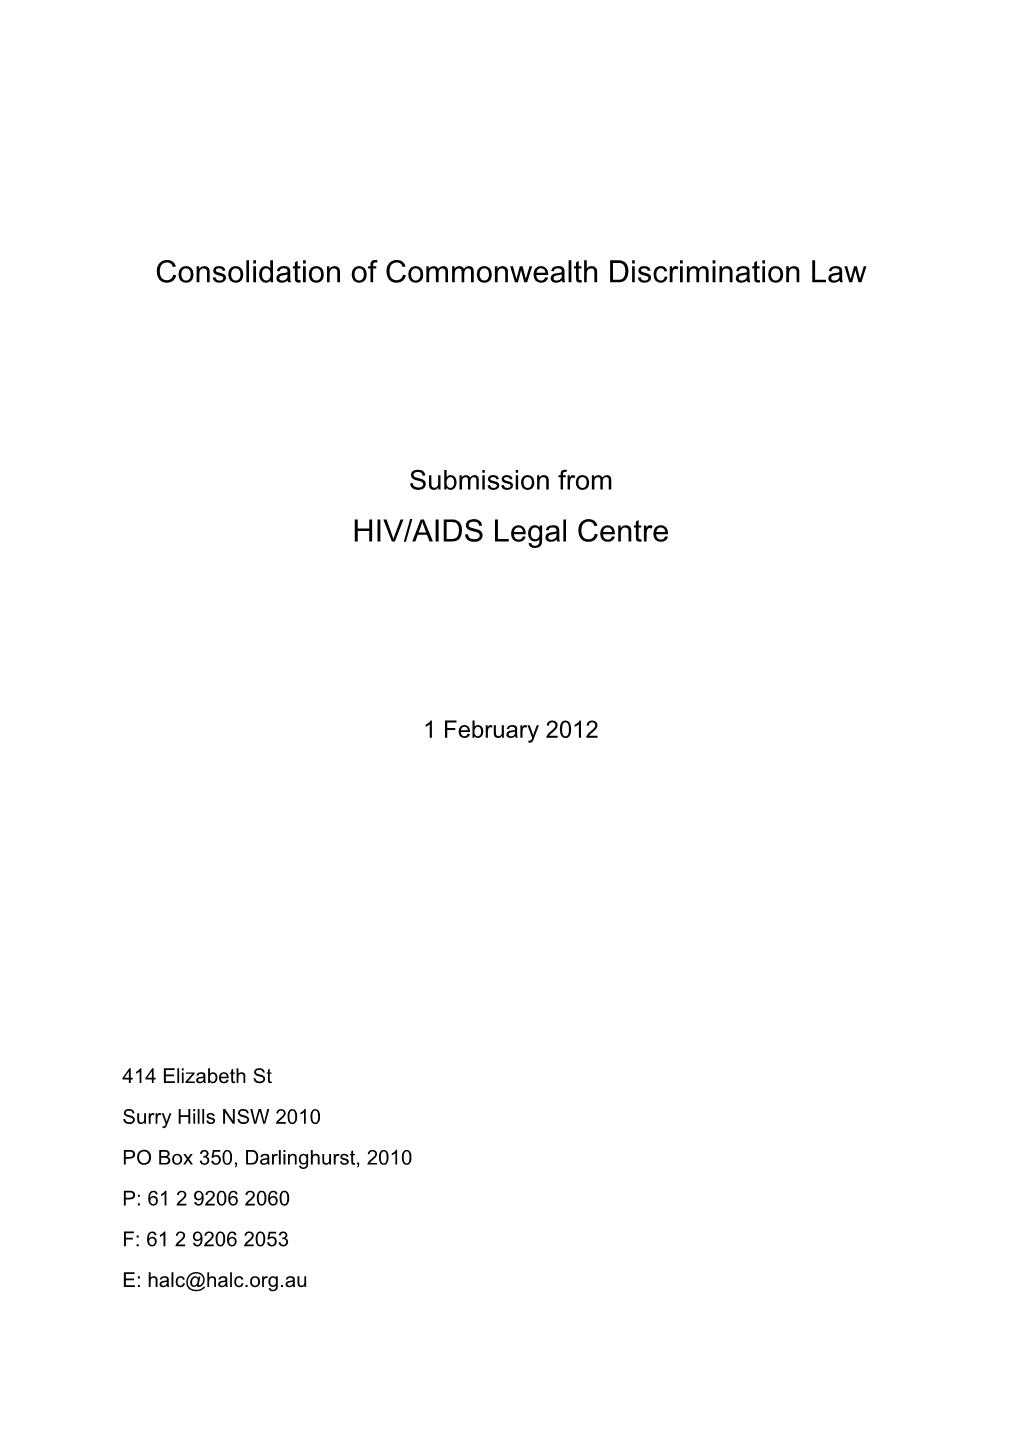 Submission on the Consolidation of Commonwealth Anti-Discrimination Laws - HIV AIDS Legal Centre